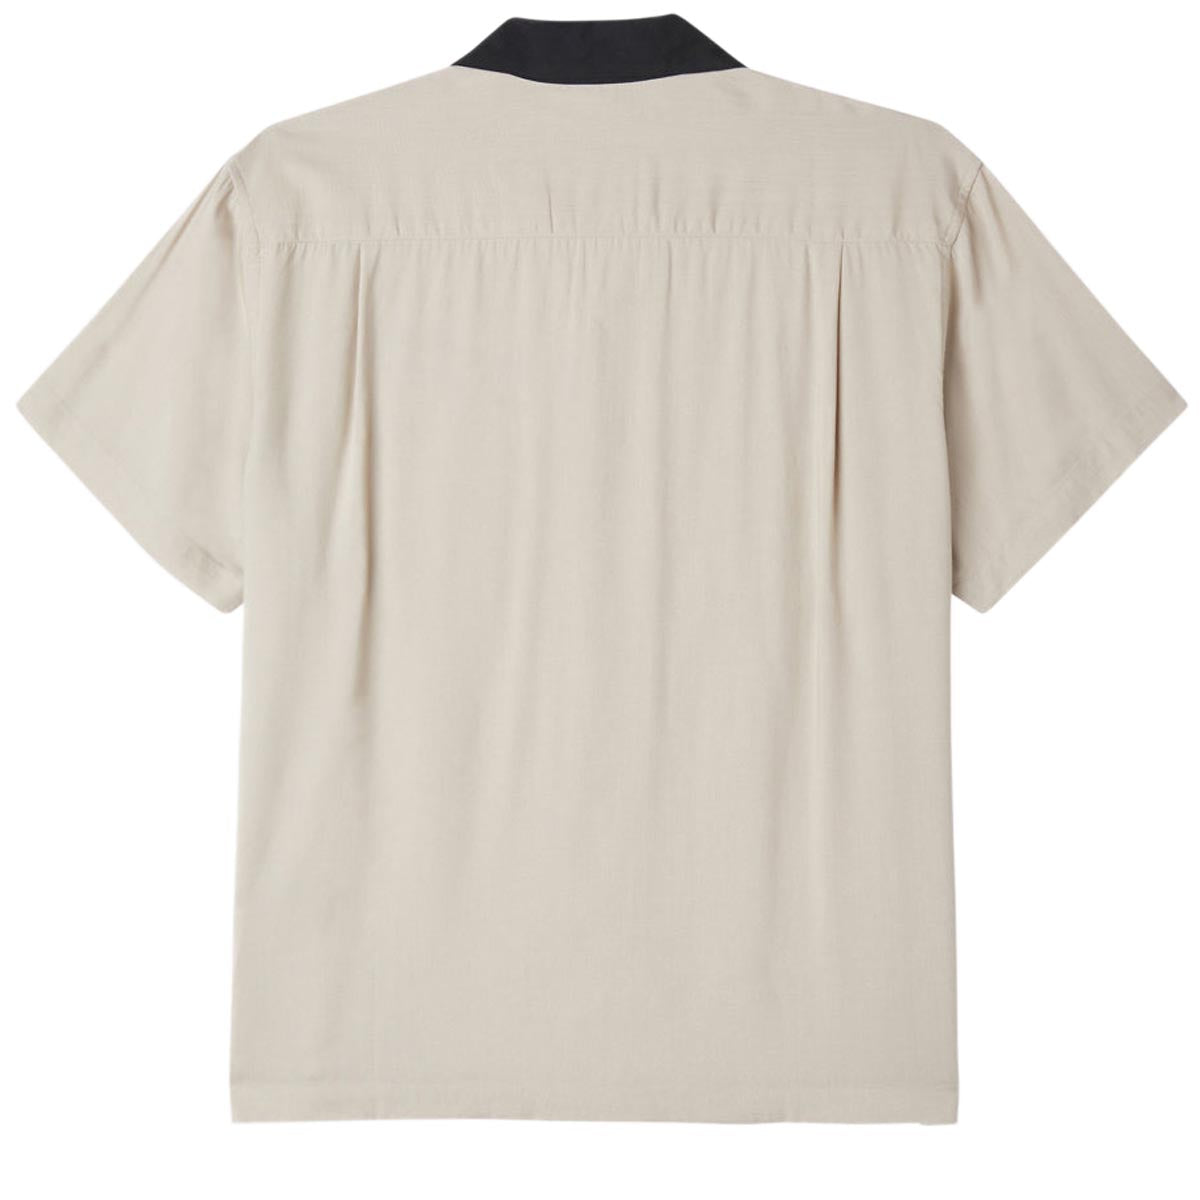 Obey Badger Woven Shirt - Silver Grey image 2